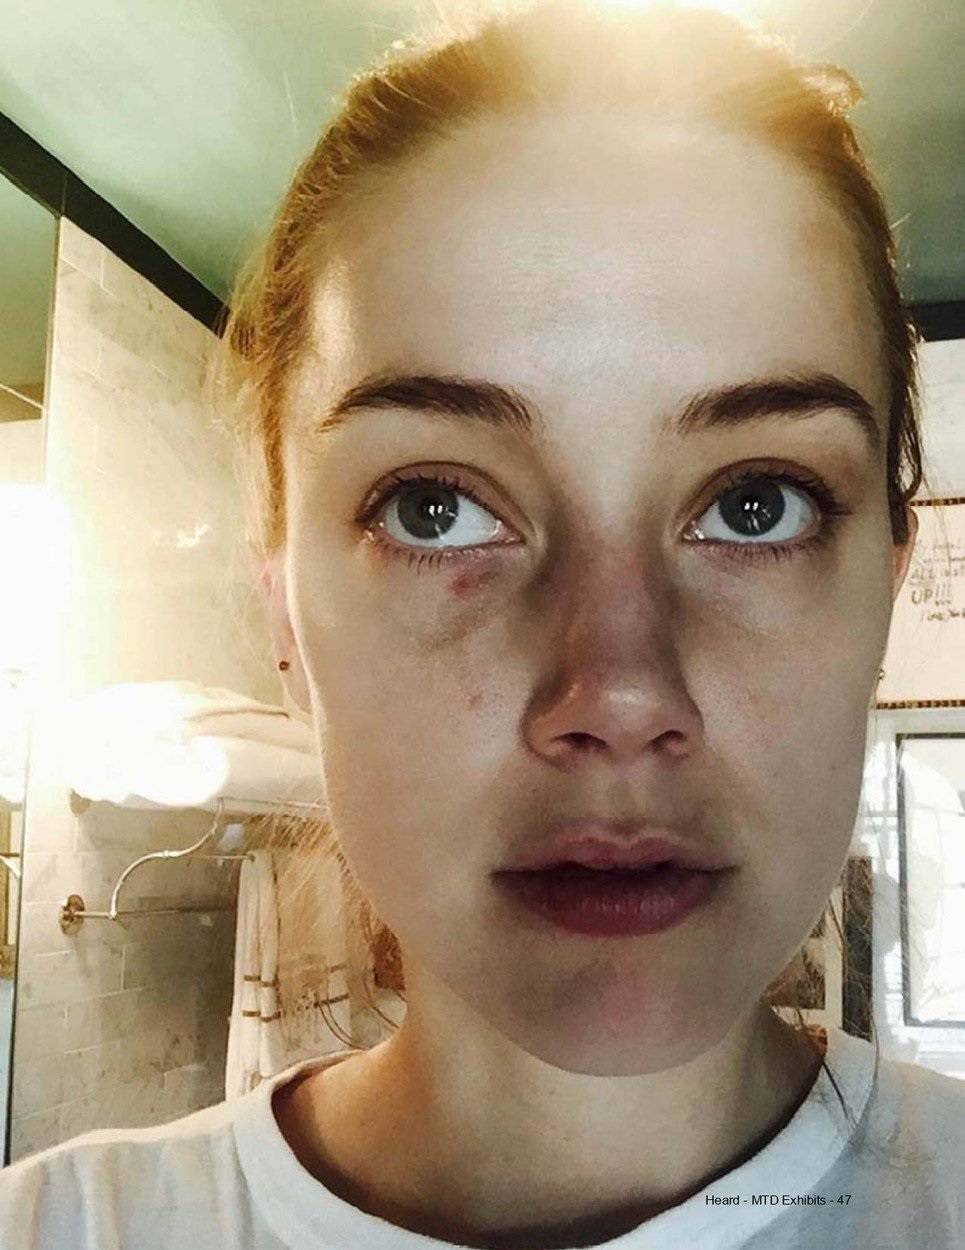 Ill f***ing kill you: Amber Heard pictured with busted lip, facial injuries and clumps of hair missing after telling Johnny Depp she wanted to leave him